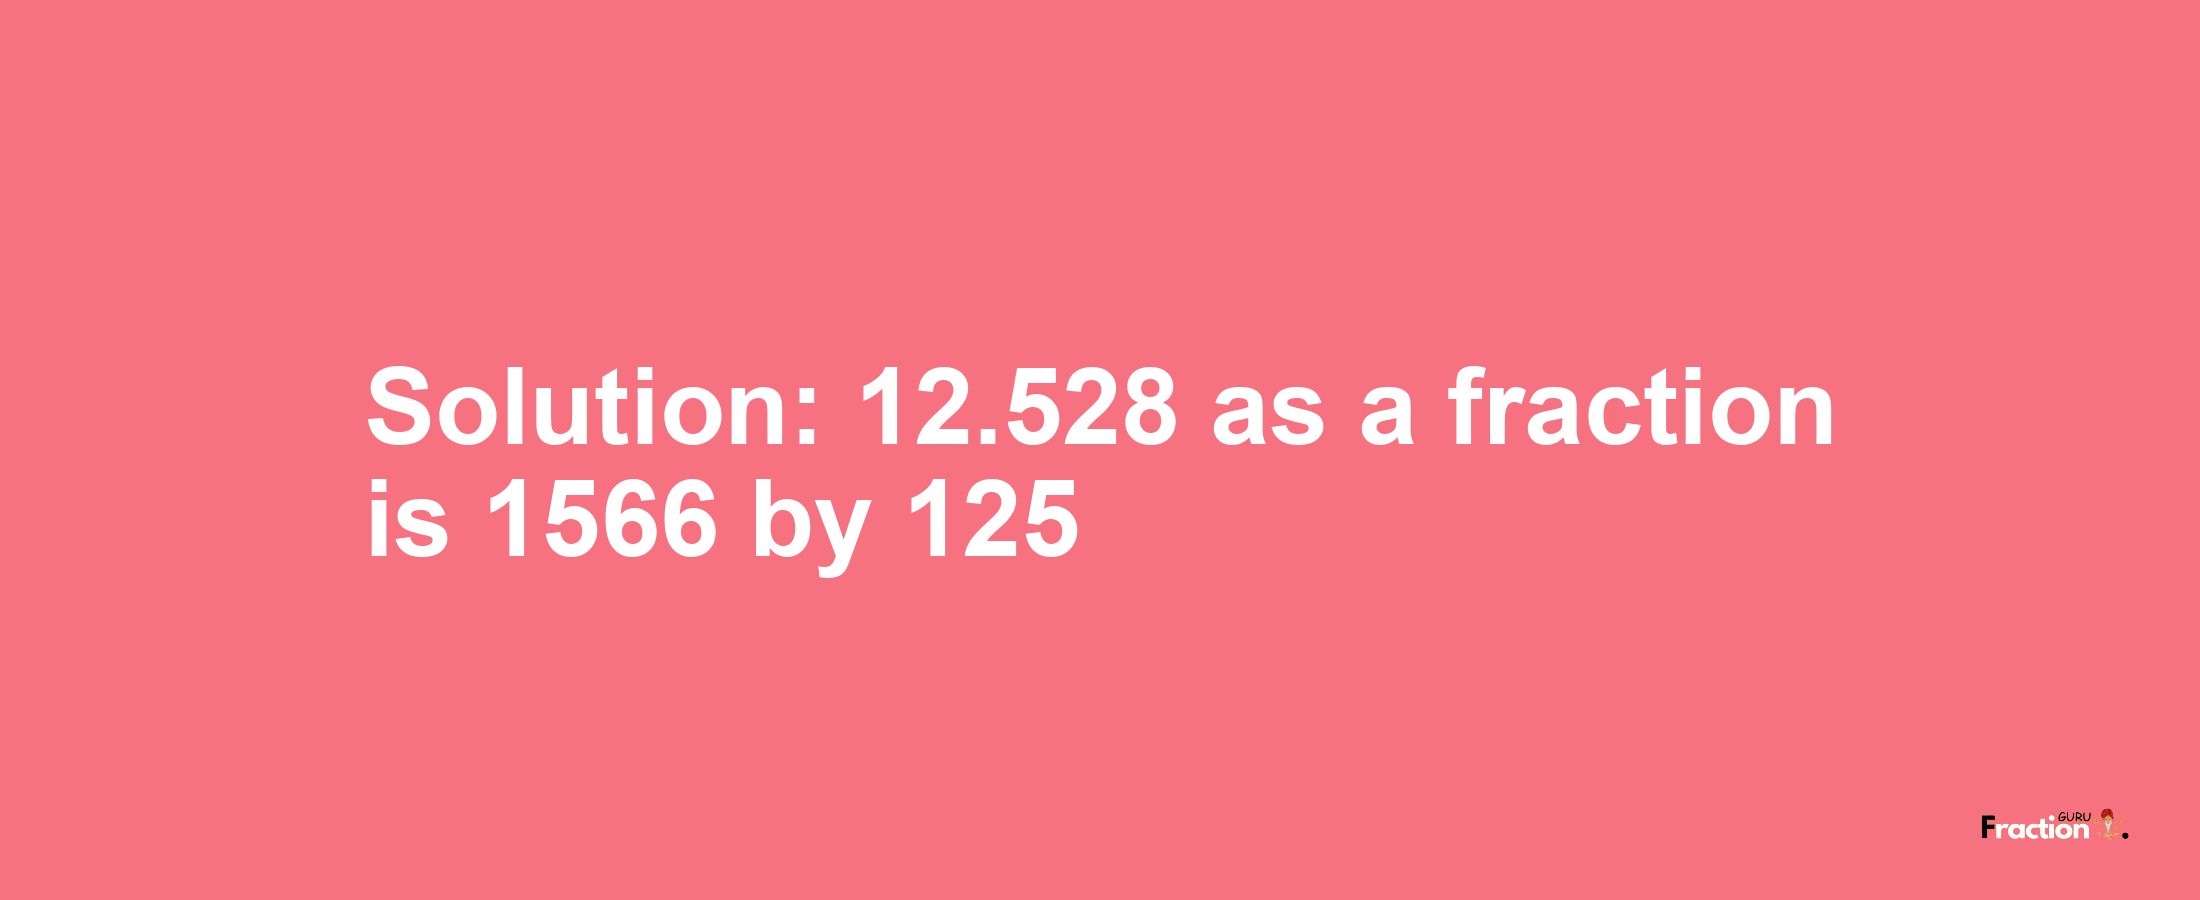 Solution:12.528 as a fraction is 1566/125